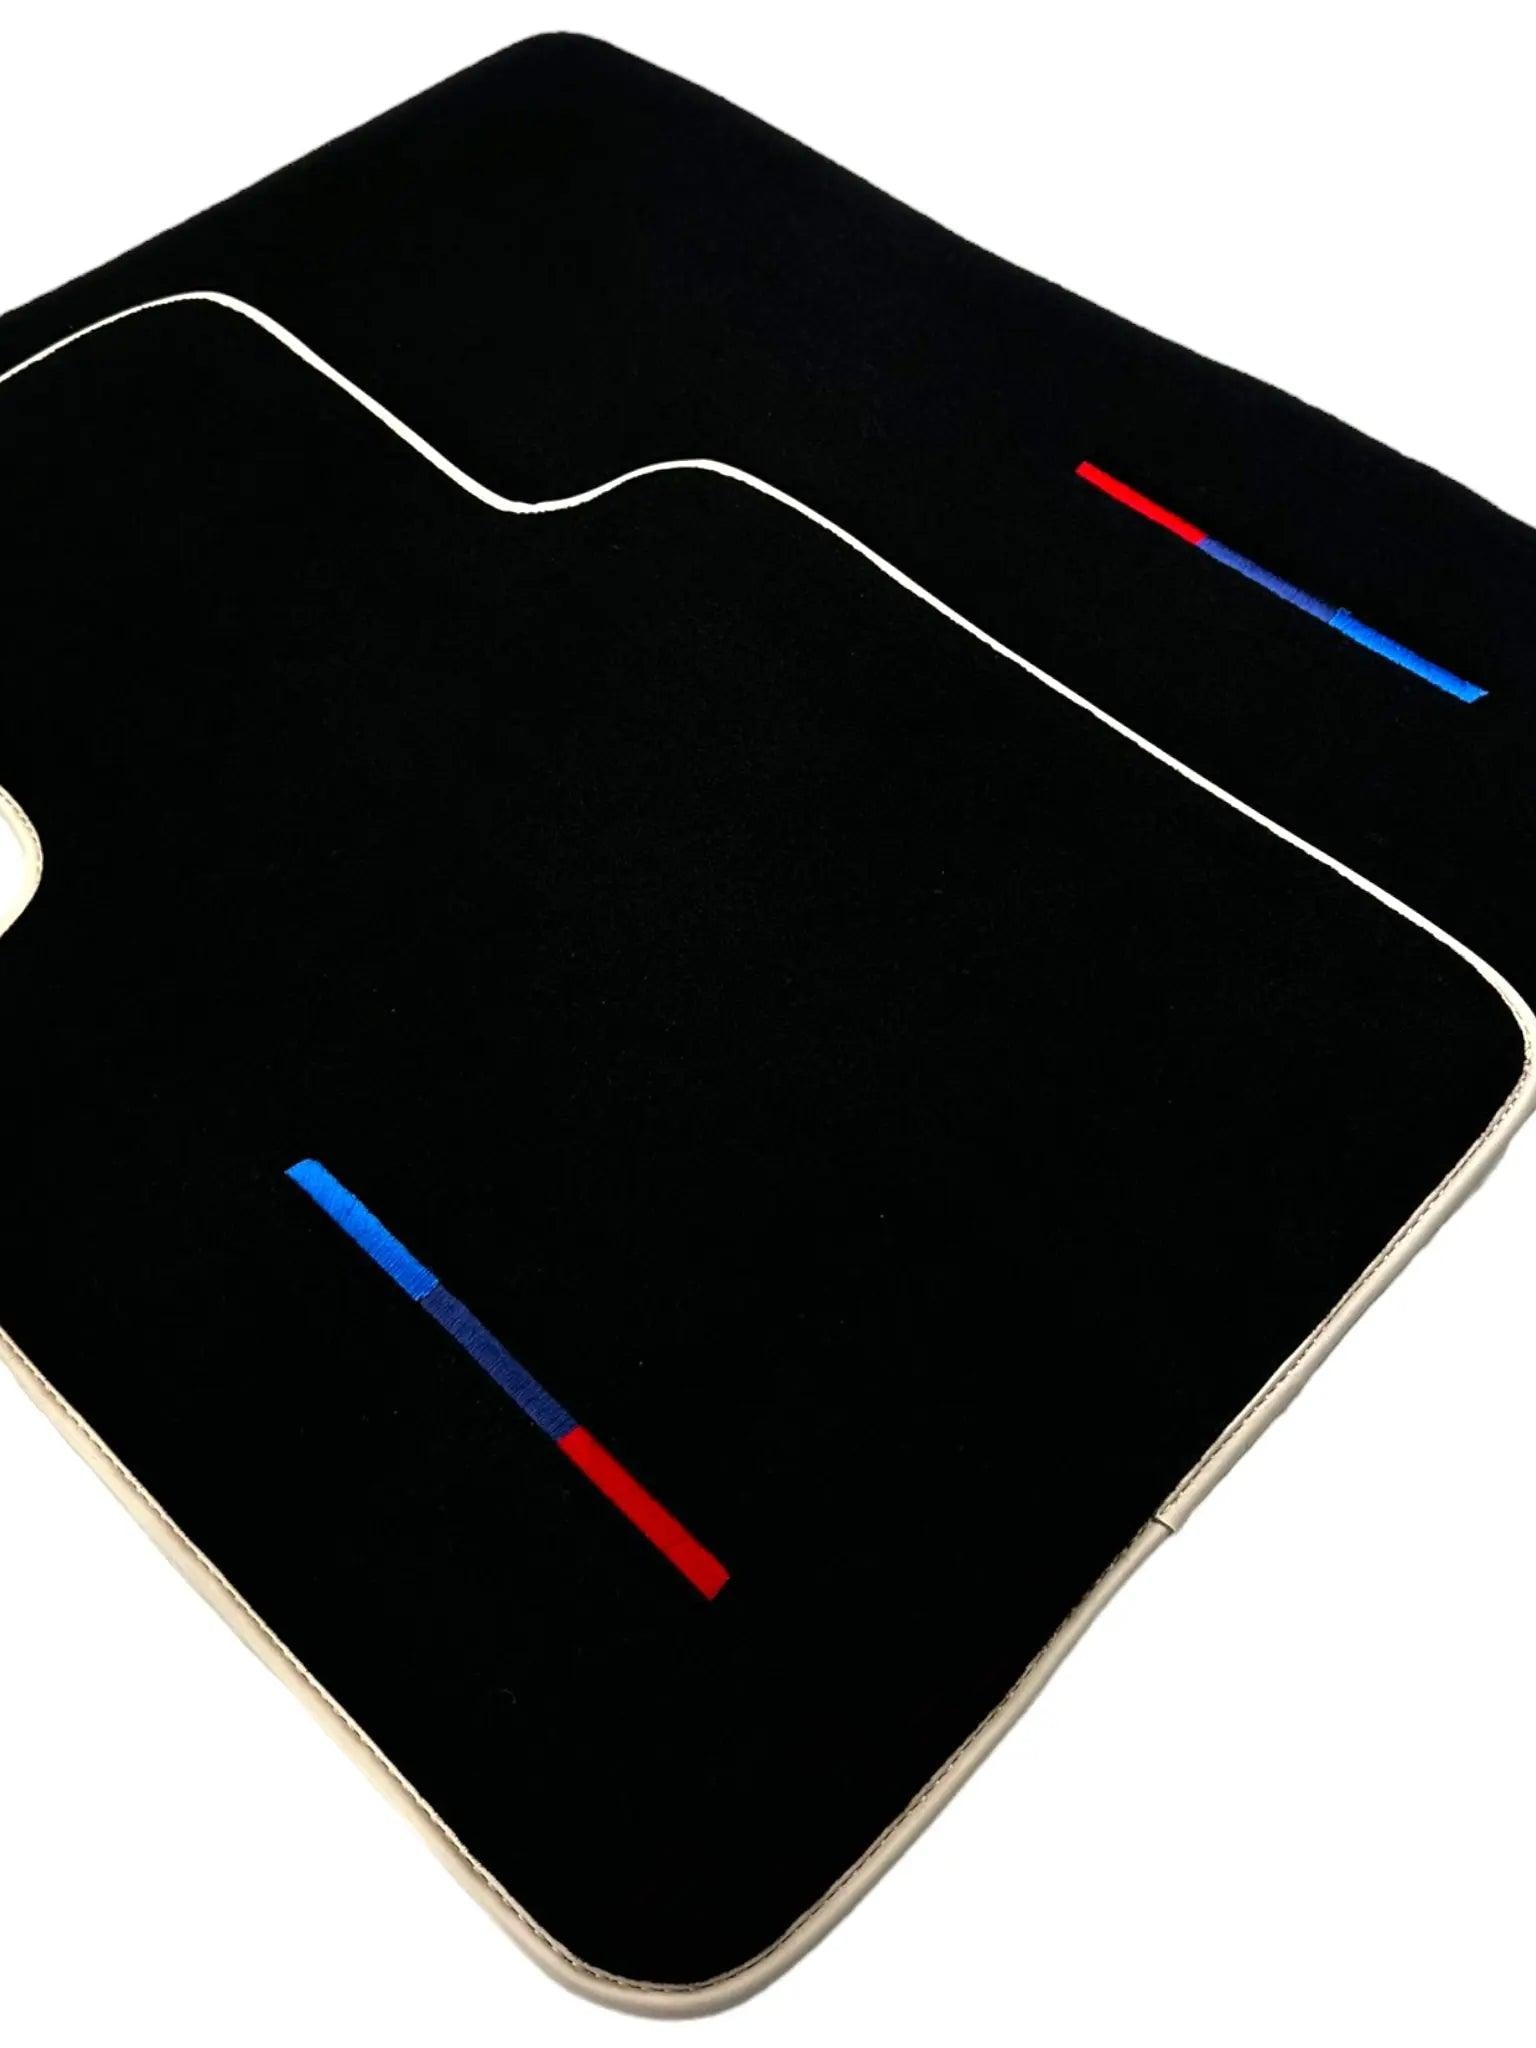 Black Floor Mats For BMW Z4 Series E89 With Color Stripes and Beige Trim Tailored Set Perfect Fit